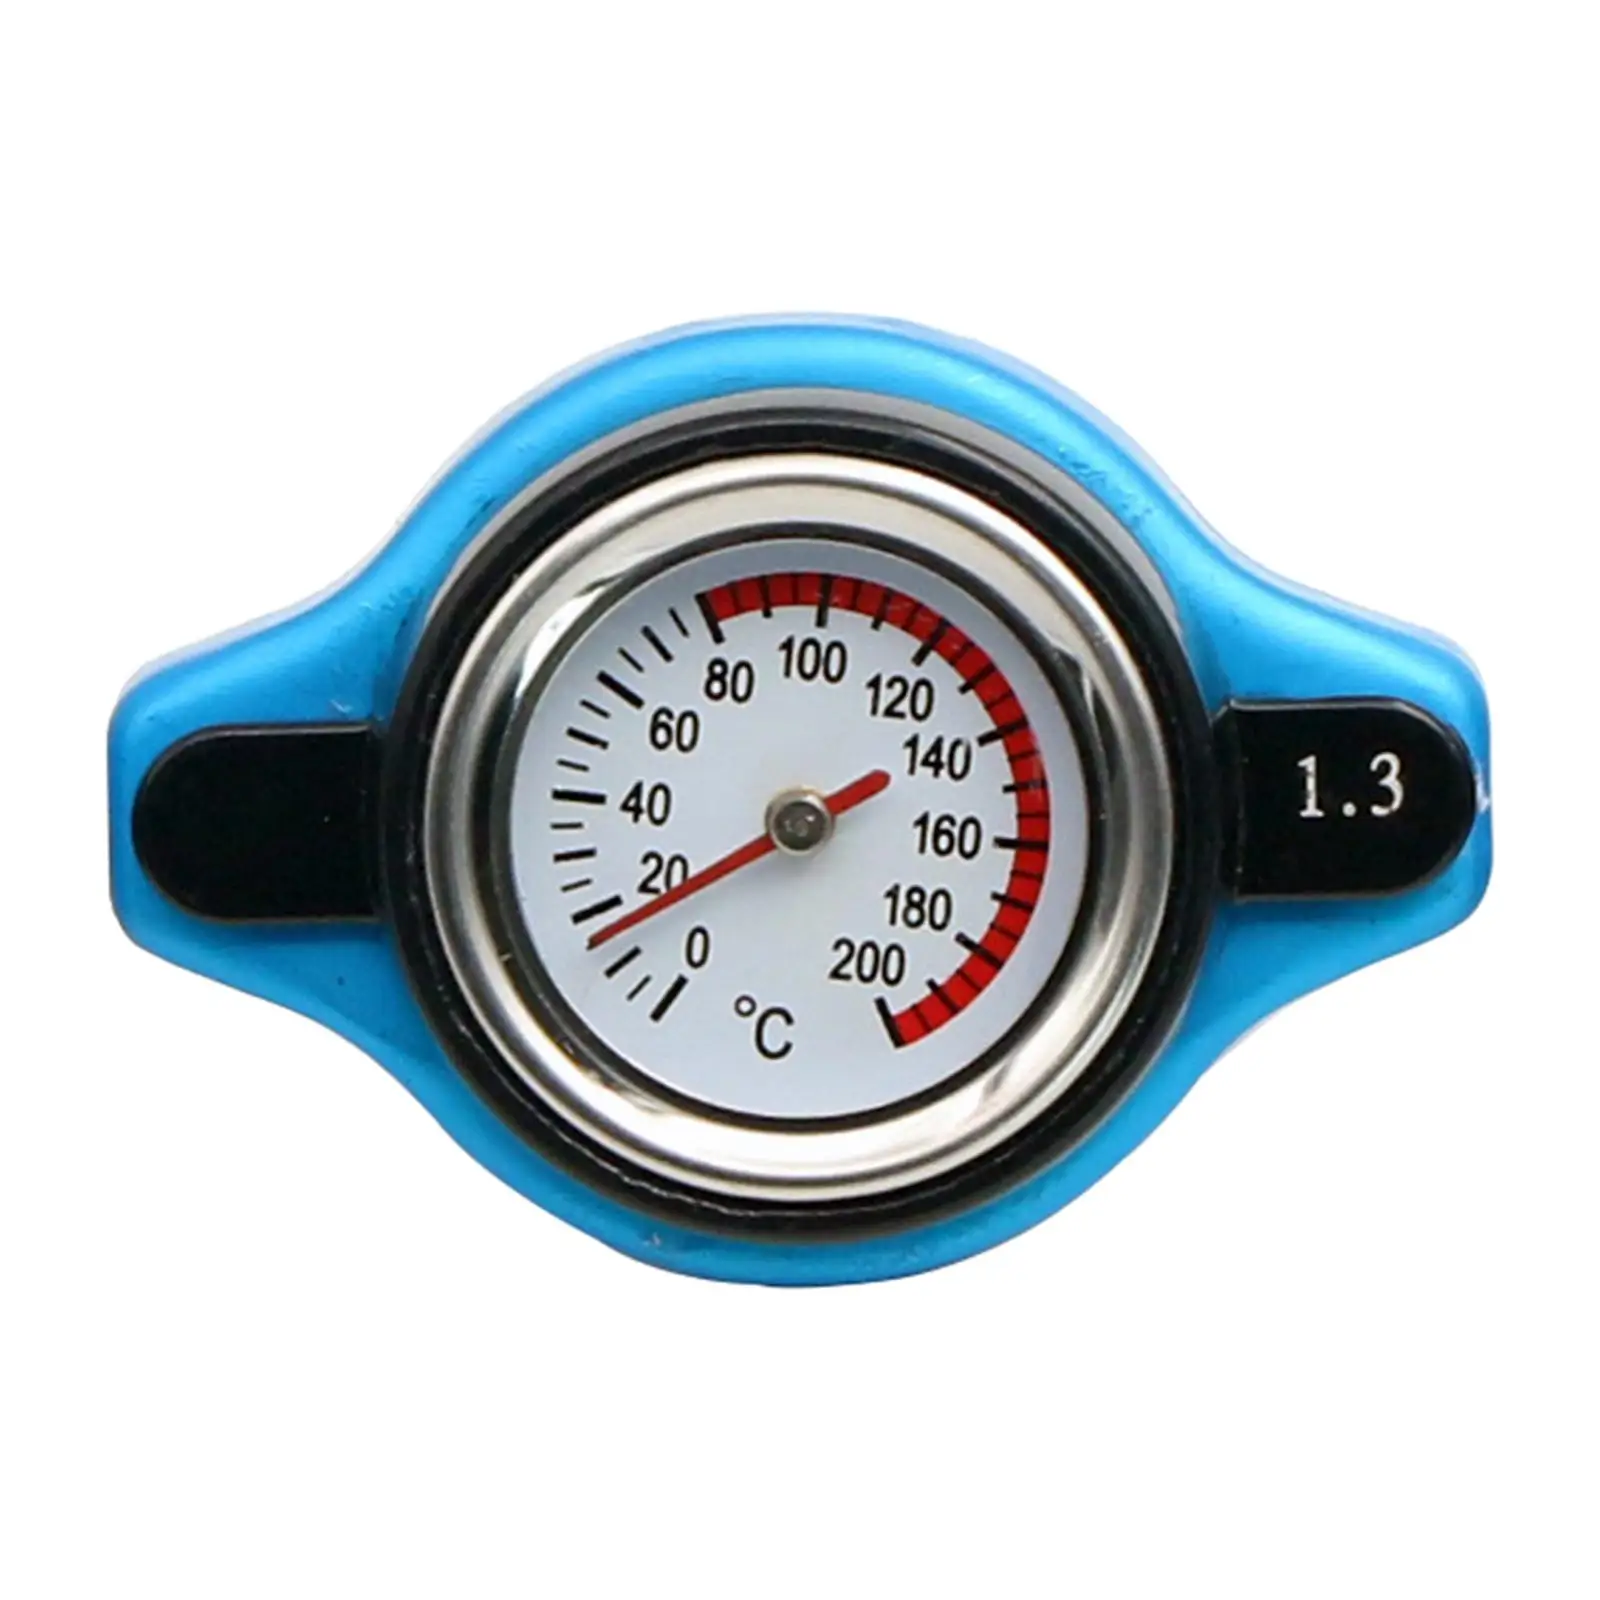 Car Thermostatic Gauge Radiator Cap Water Temperature Gauge High Performance Automobile Accessory Directly Replace Professional